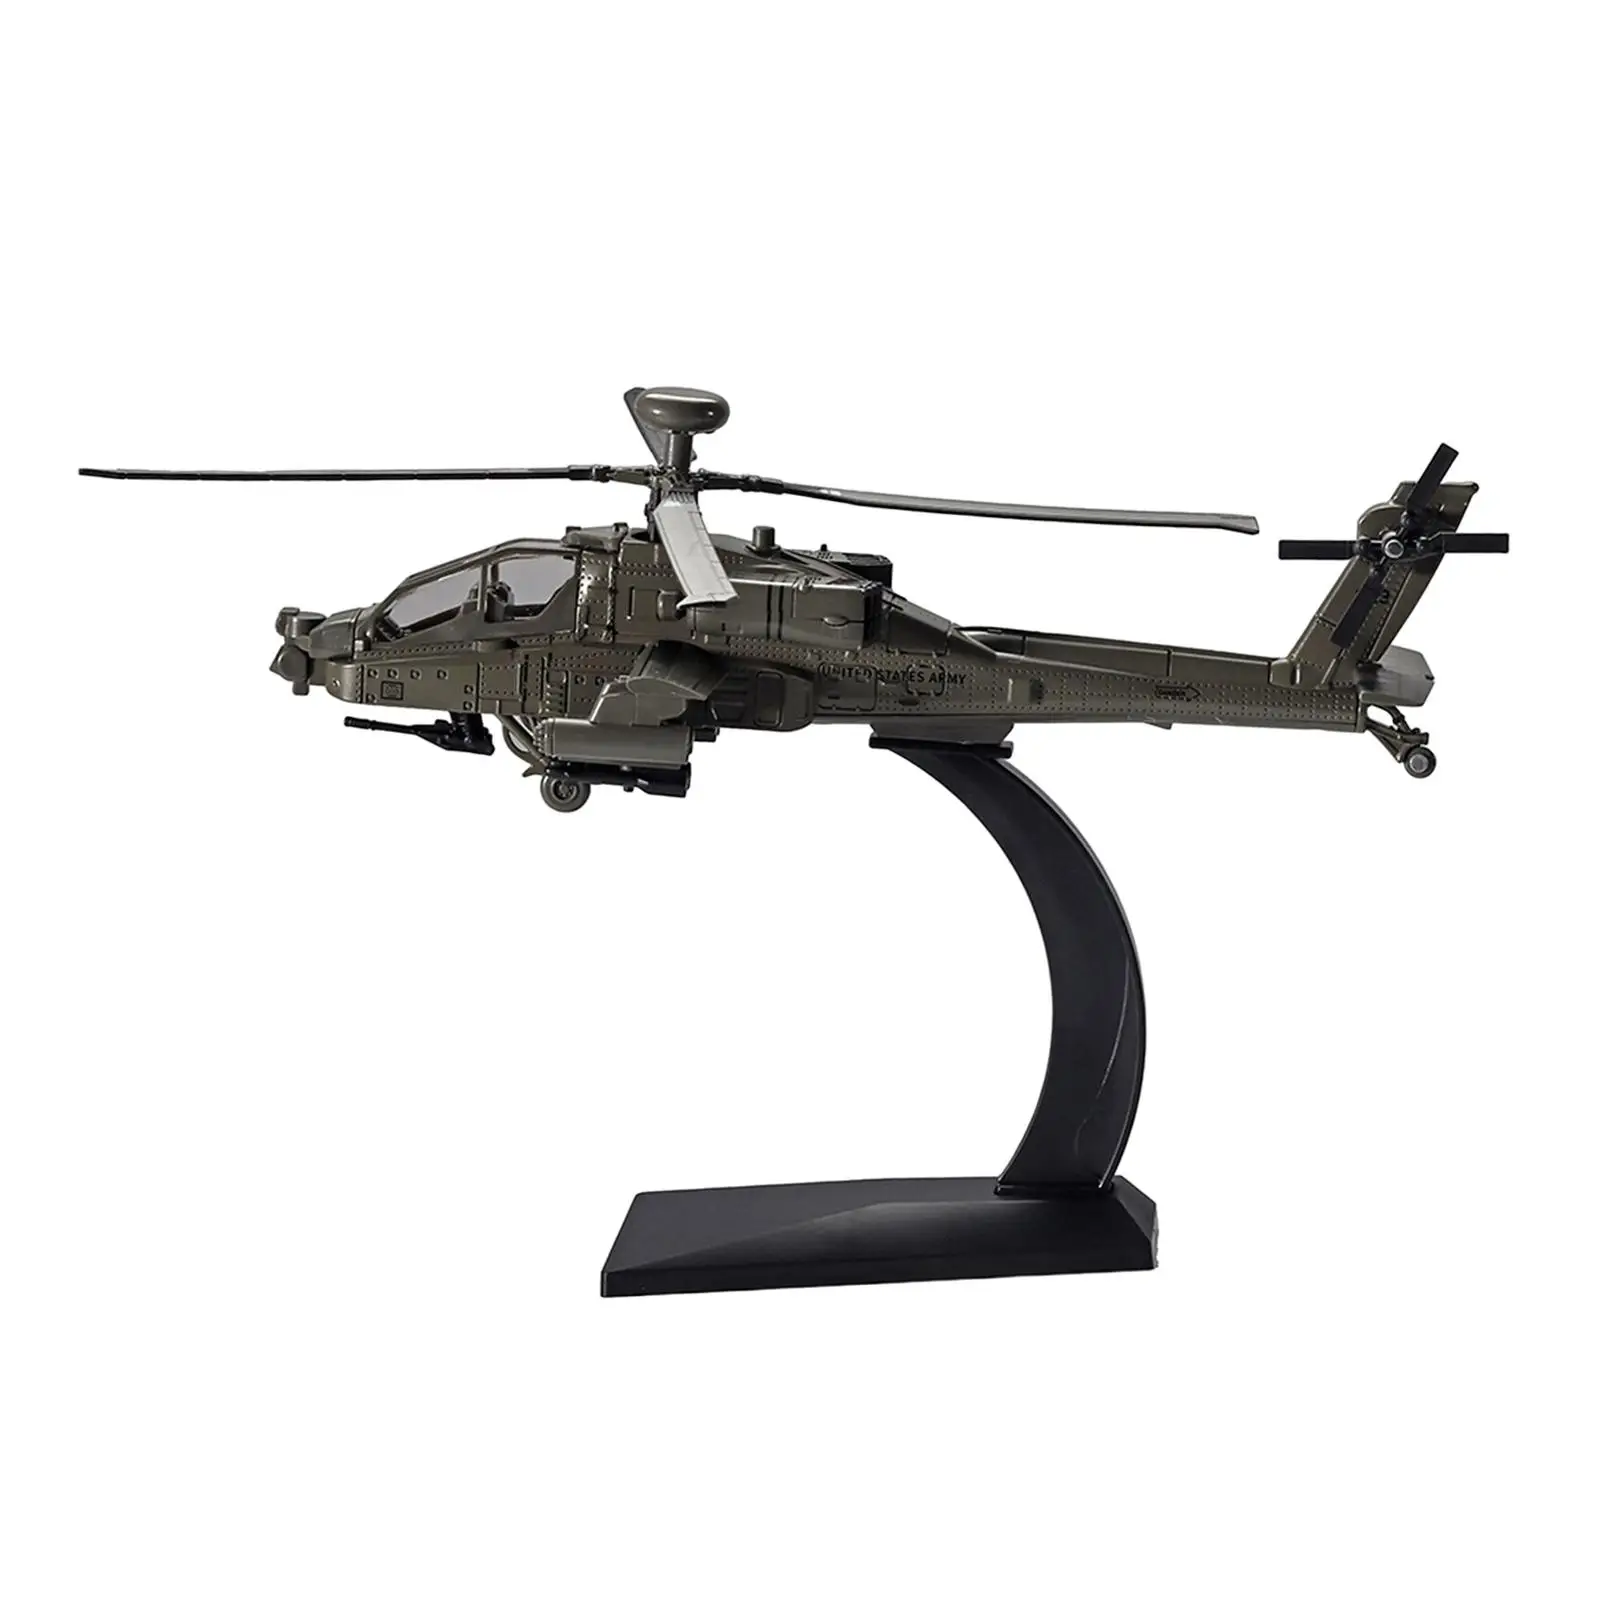 Household Aircraft Model collection with Stand Alloy Display Helicopter Model Plane Airplane for Countertop Decoration